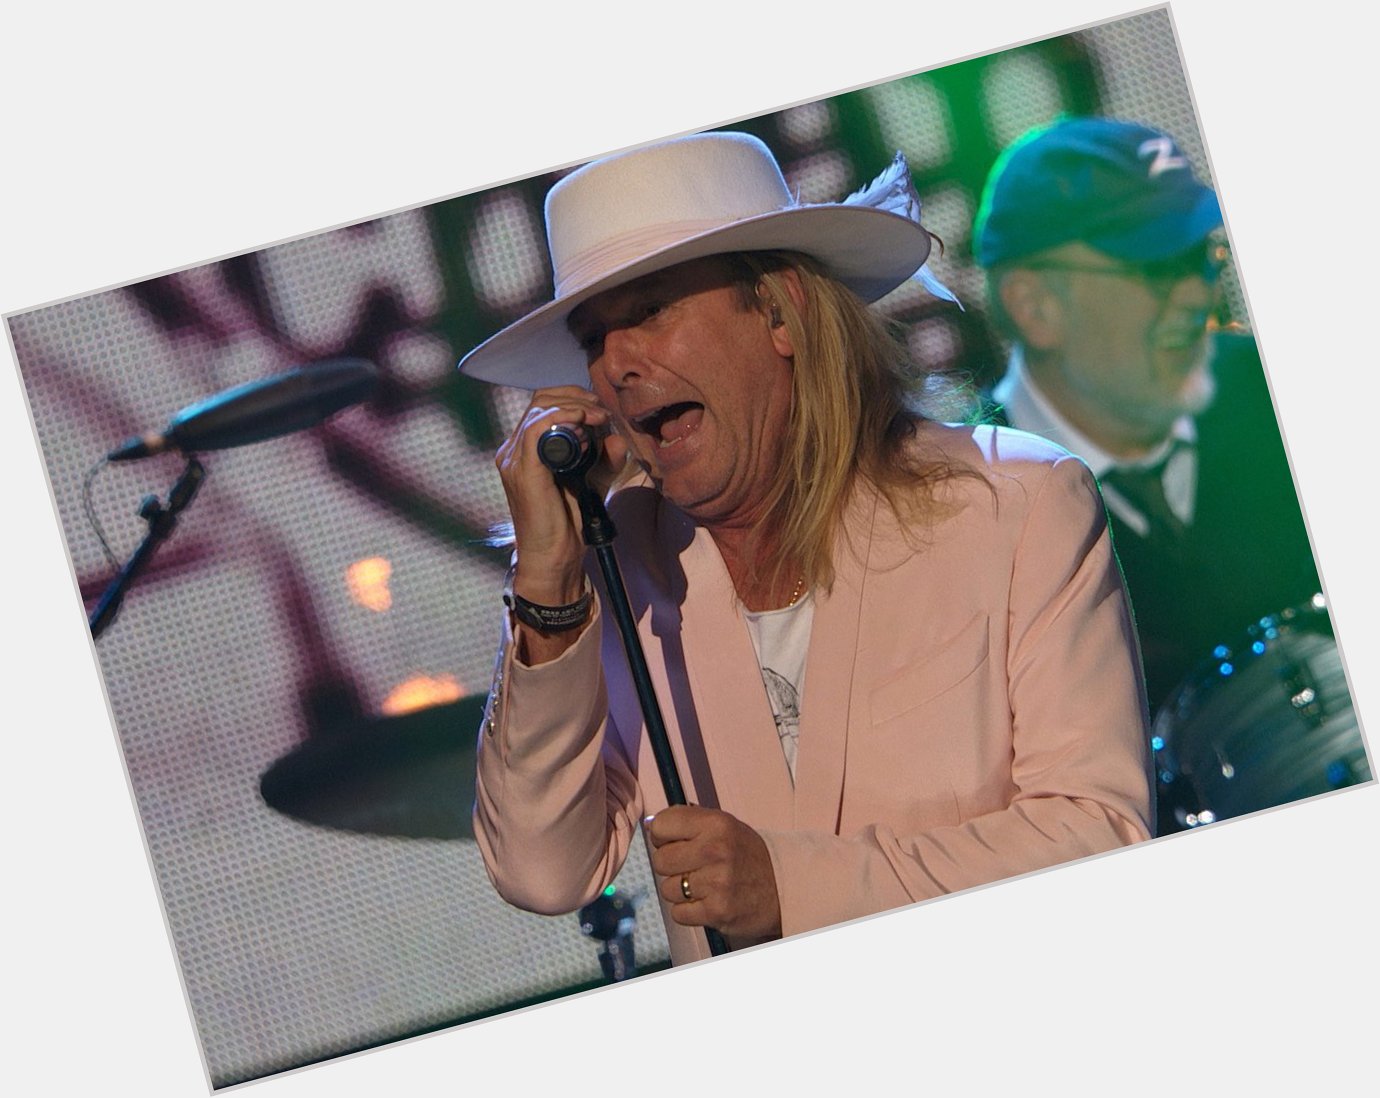 Please join me here at in wishing the one and only Robin Zander a very Happy 68th Birthday today  